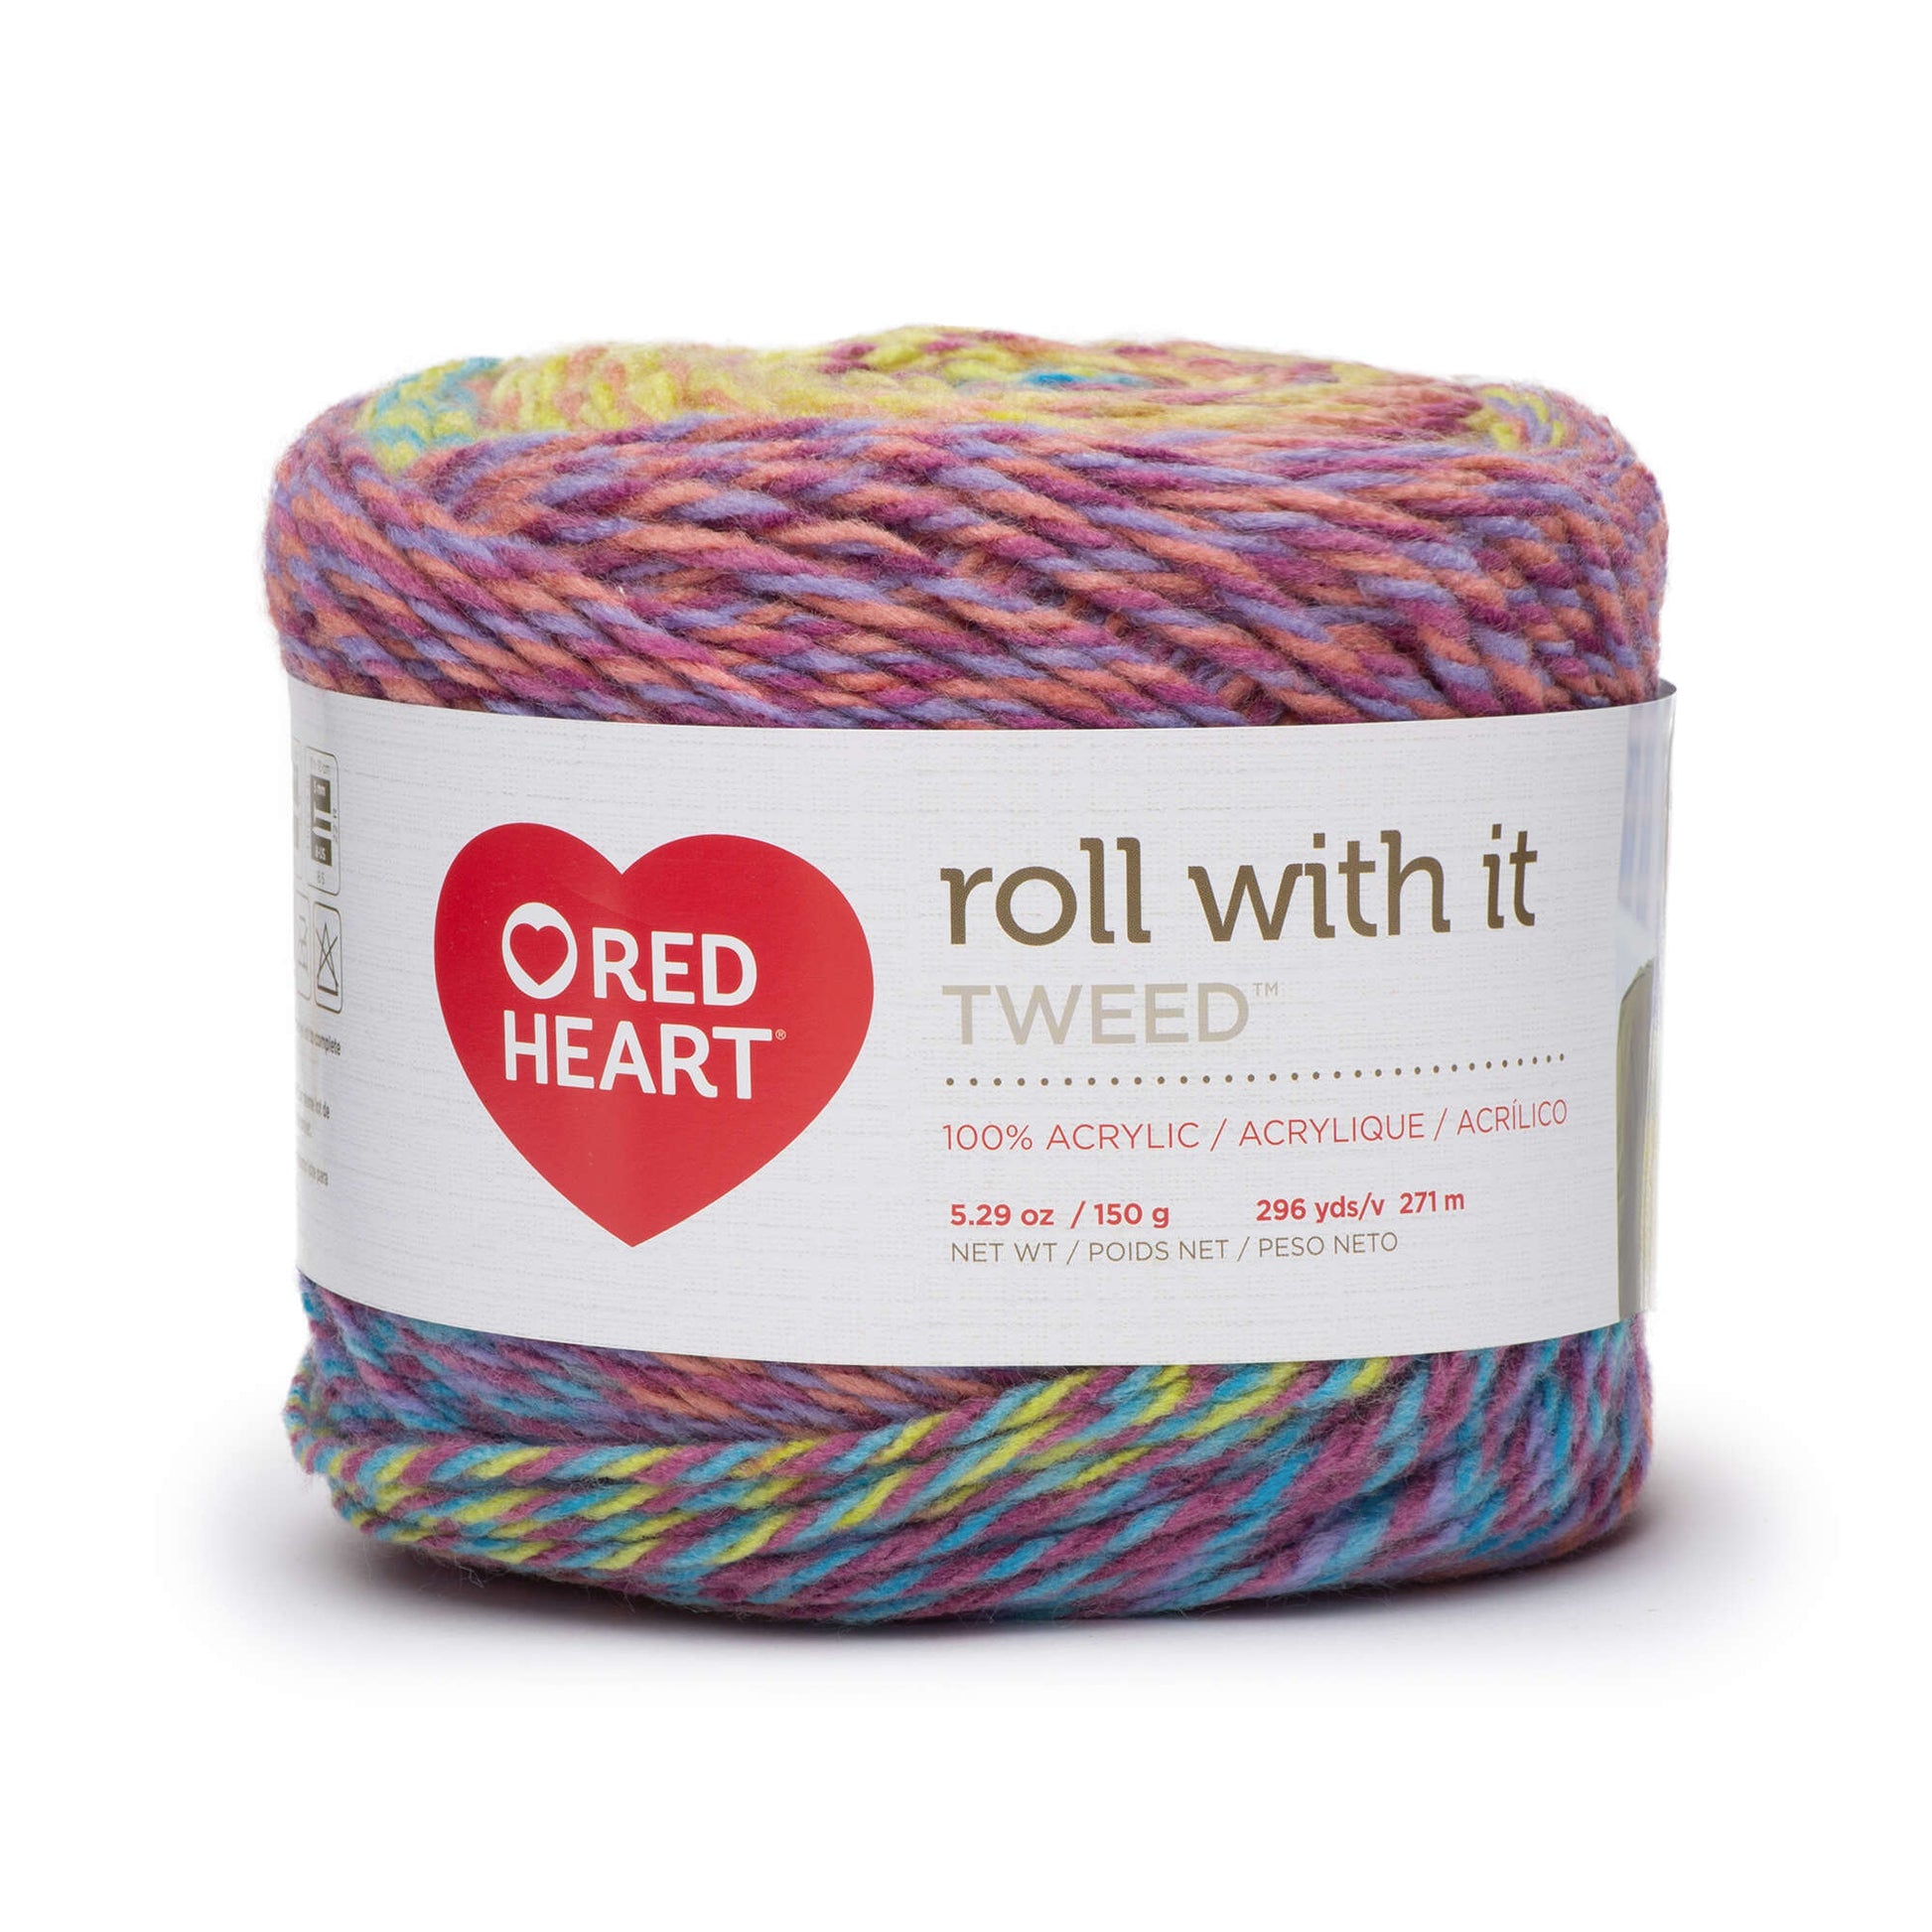 Red Heart Roll With It Tweed Yarn - Clearance shades Vintage